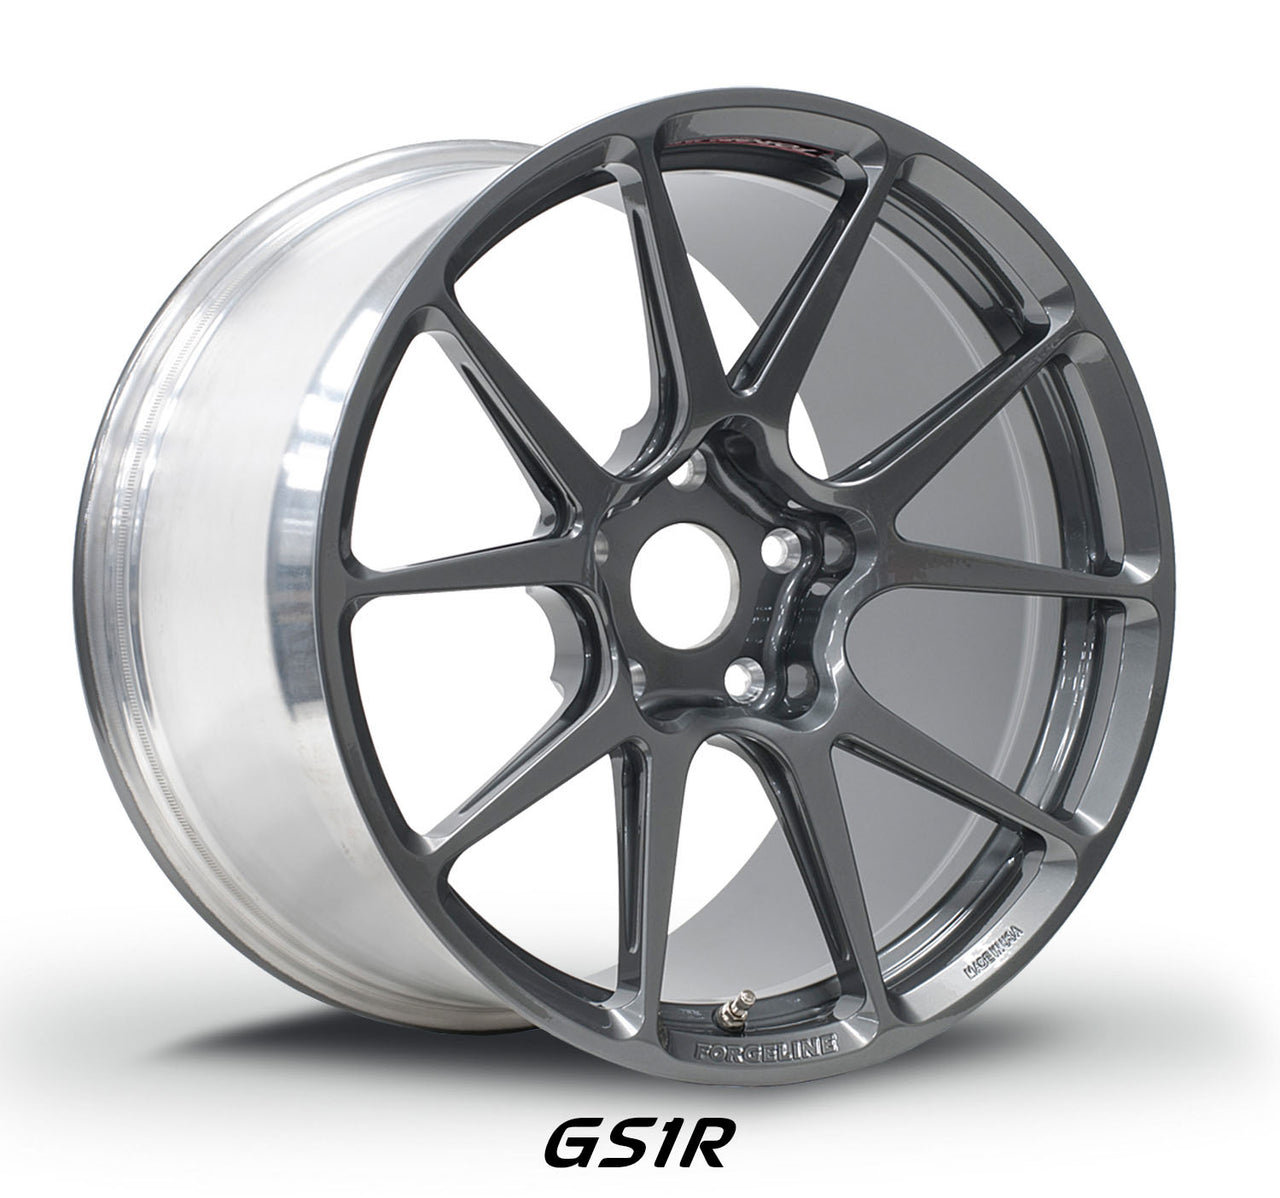 Forgeline GS1R Open Lug racing wheel in Pearl Gray is exceptionally strong and light weight for track use